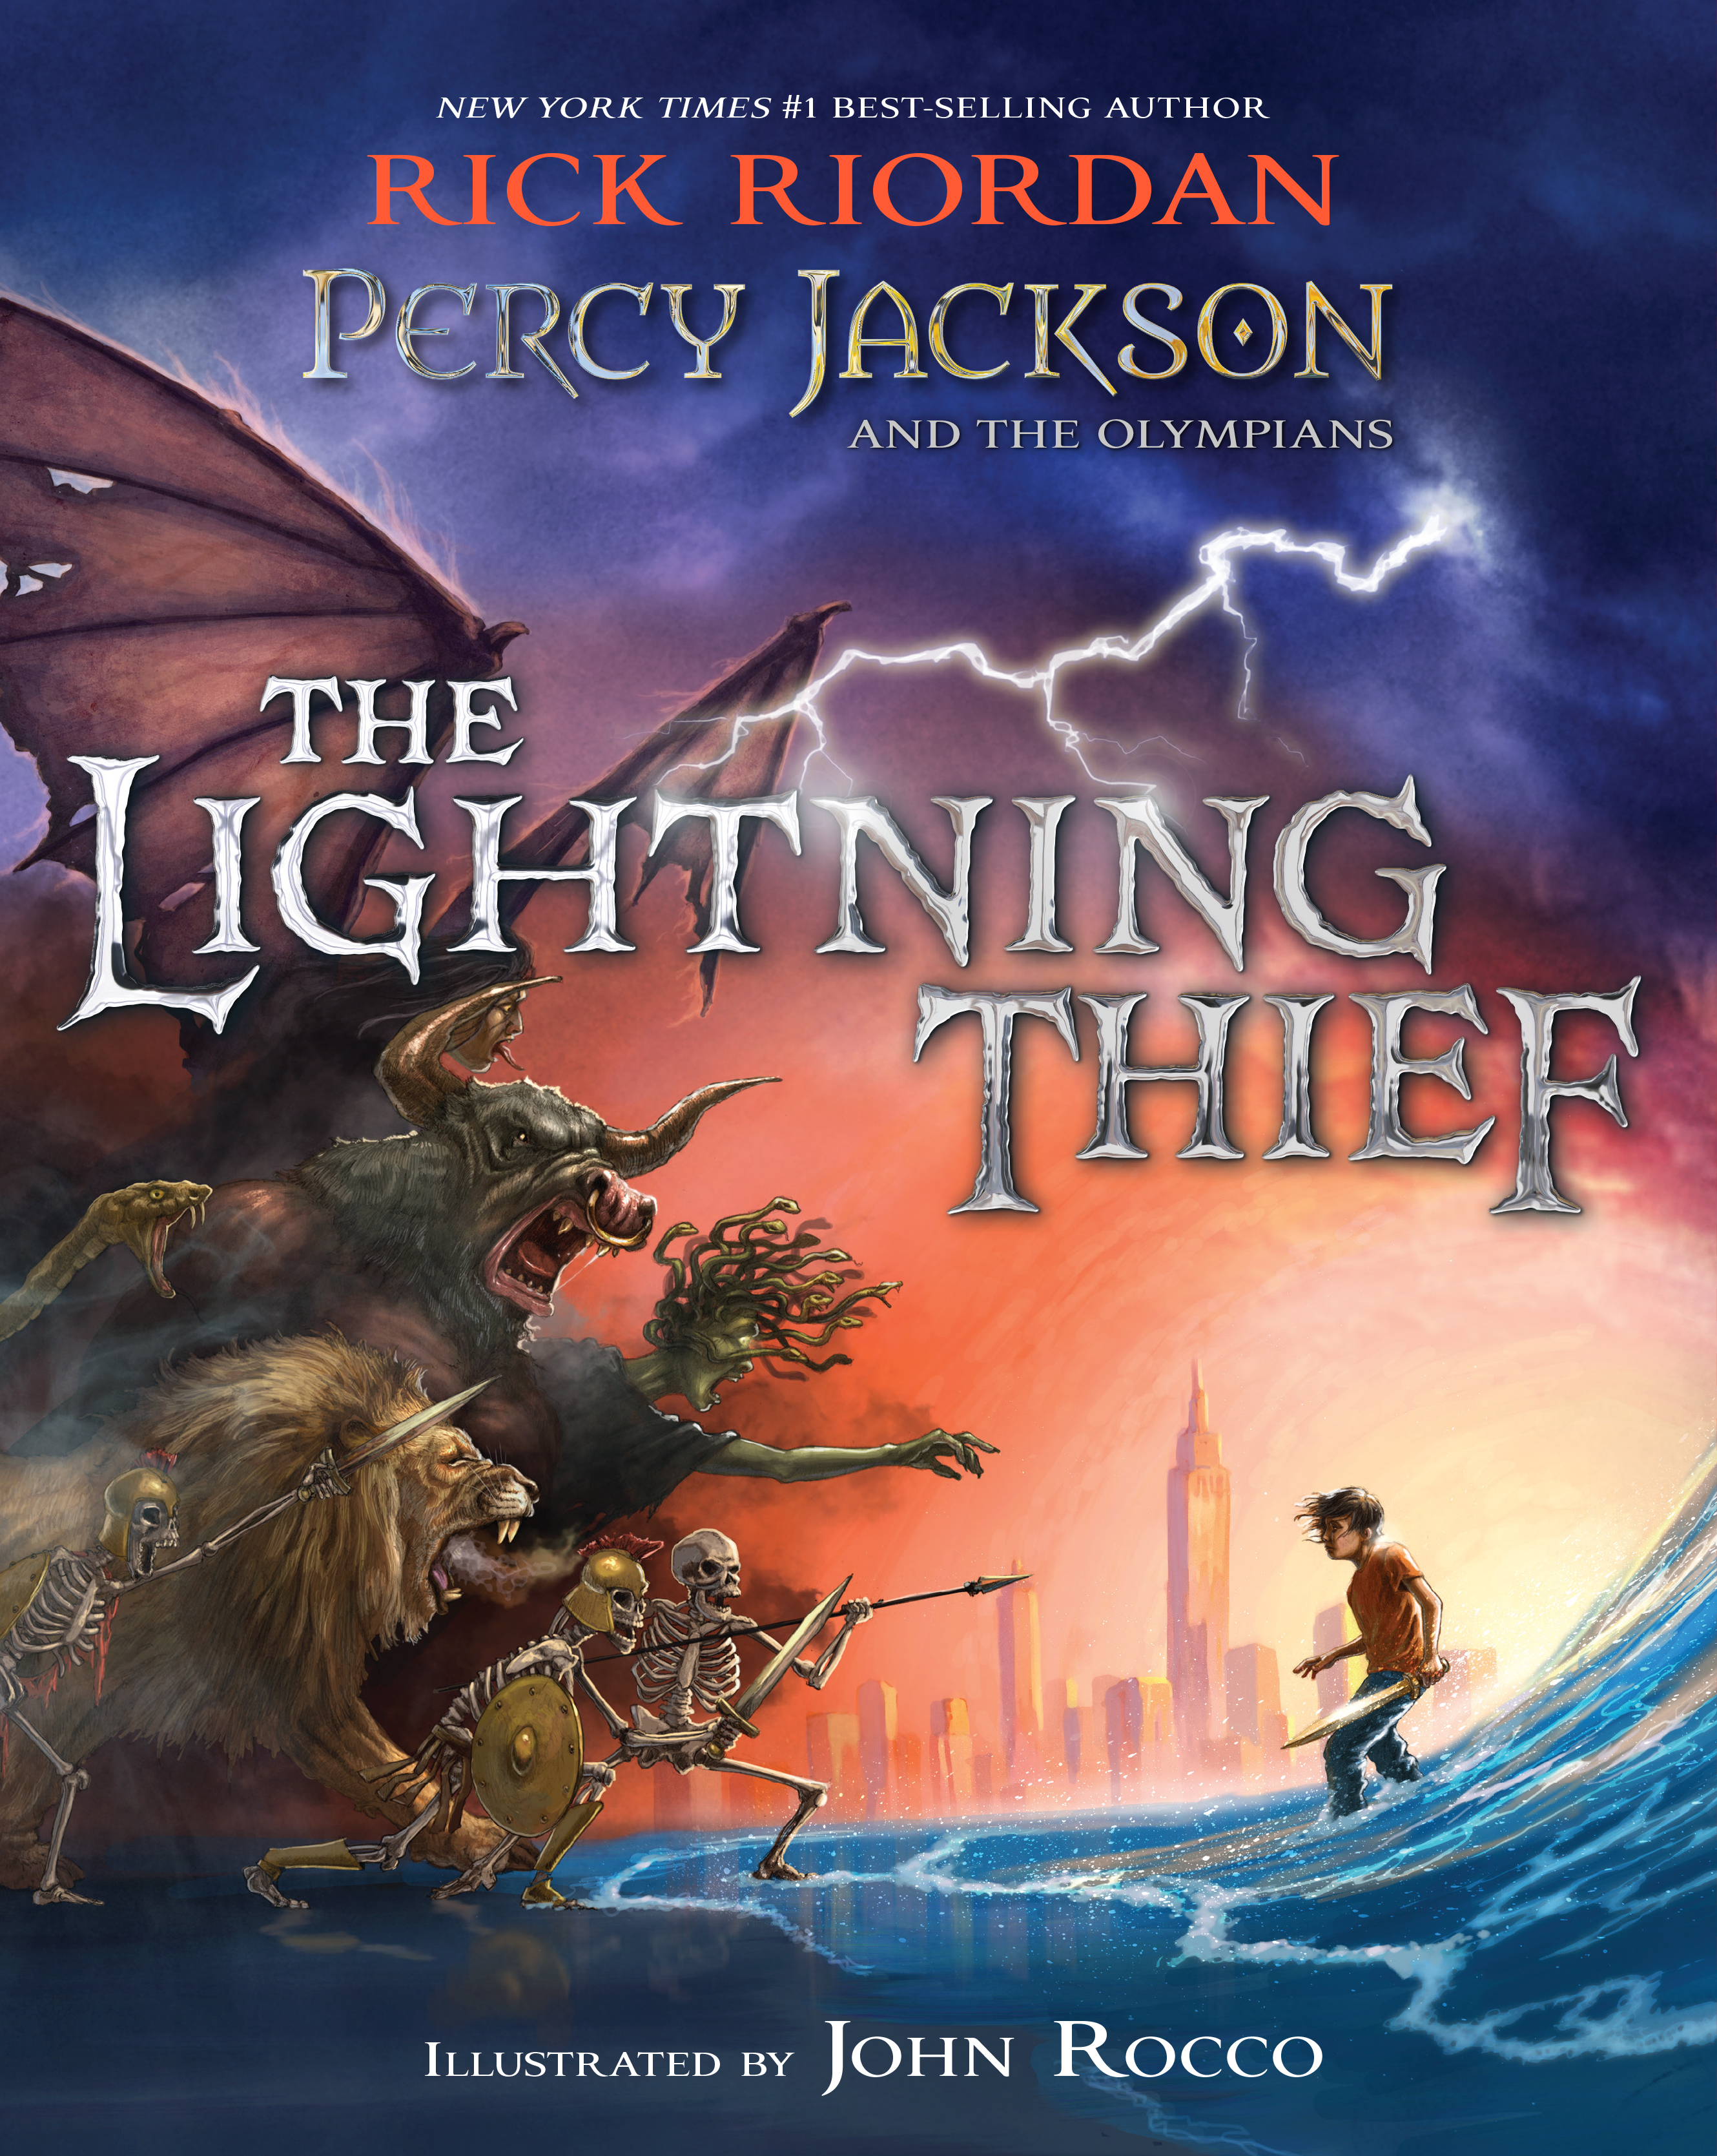 10 Monsters From The 'Percy Jackson' Books That Could Show Up In The  Disney+ Series